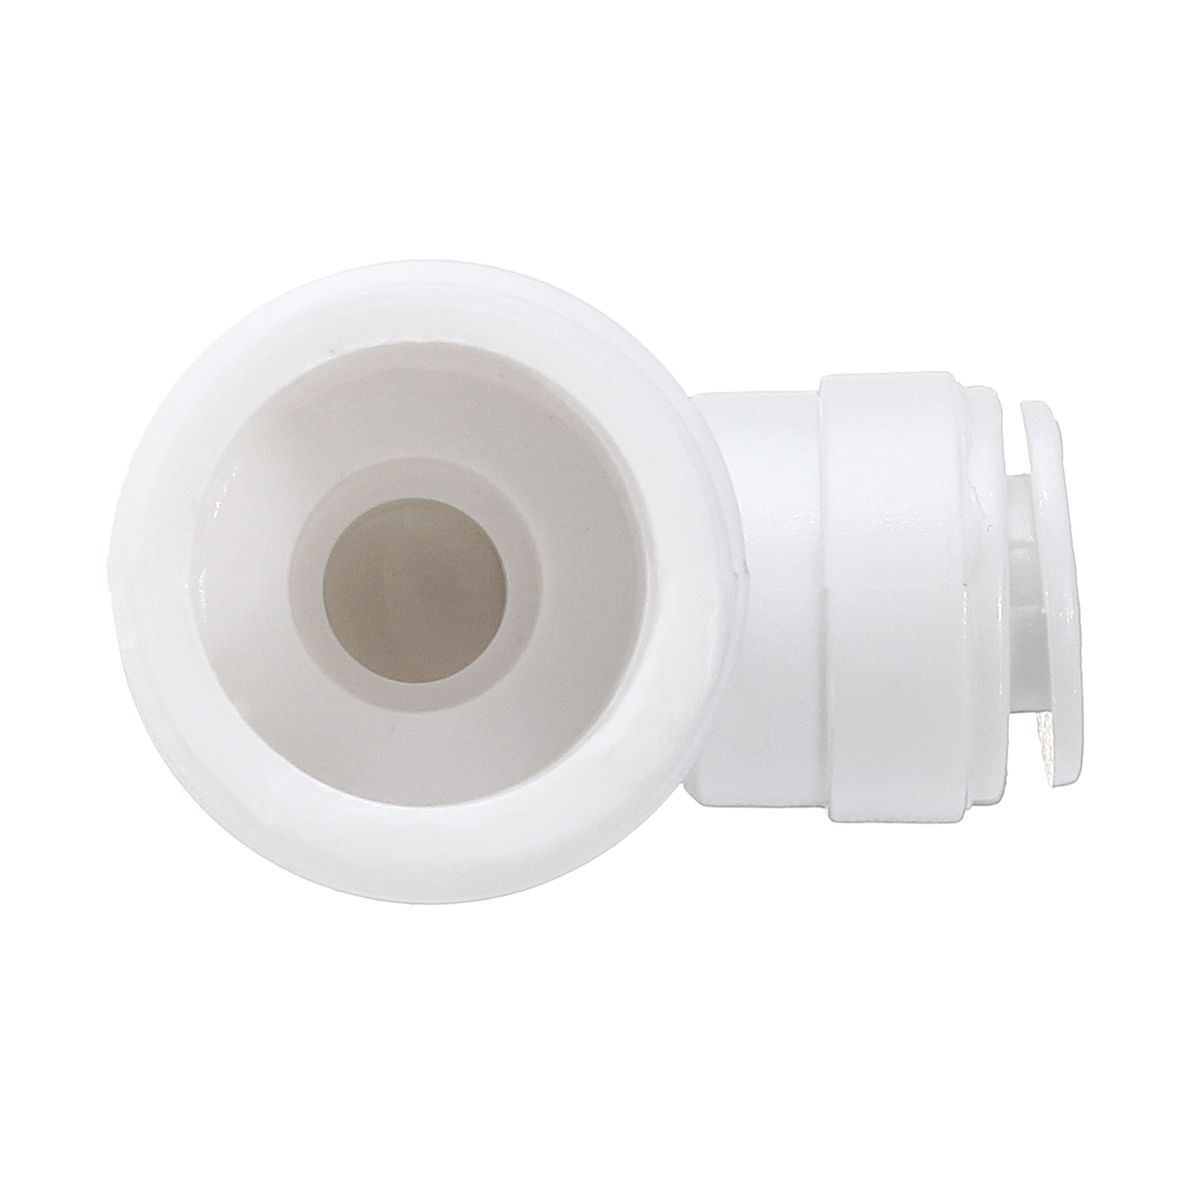 14-12-Inch-RO-Grade-L-Type-Water-Quick-Connect-Fittings-Pipes-for-Water-Filters-1378500